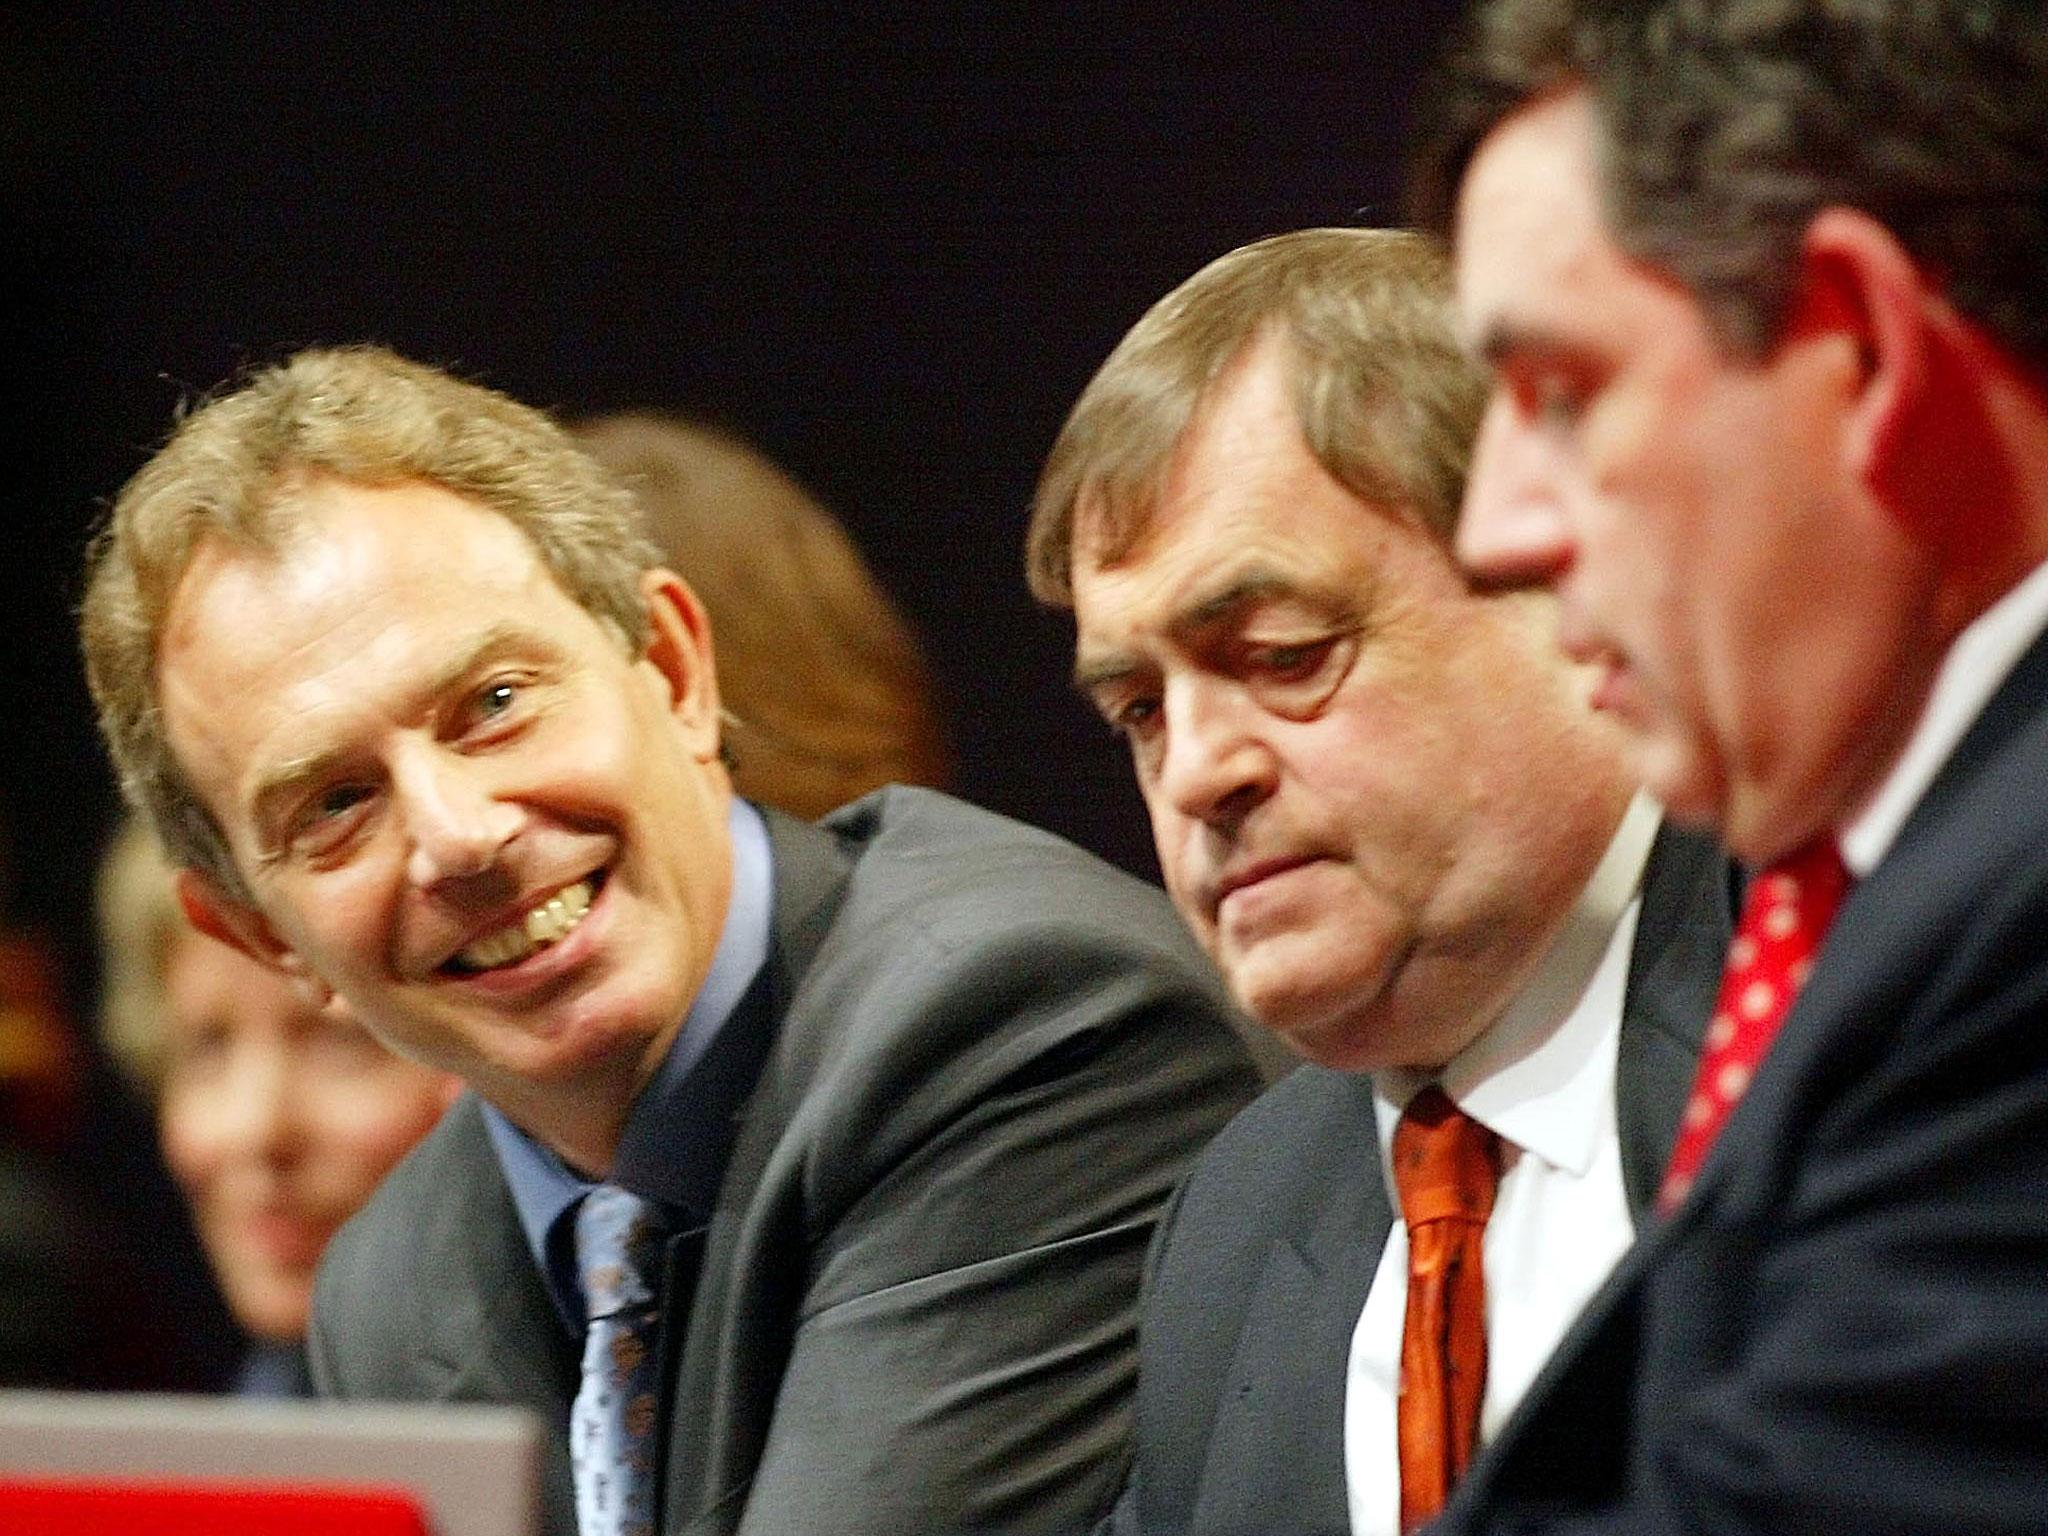 Tony Blair led a cultural movement with New Labour’s landslide victory in 1997